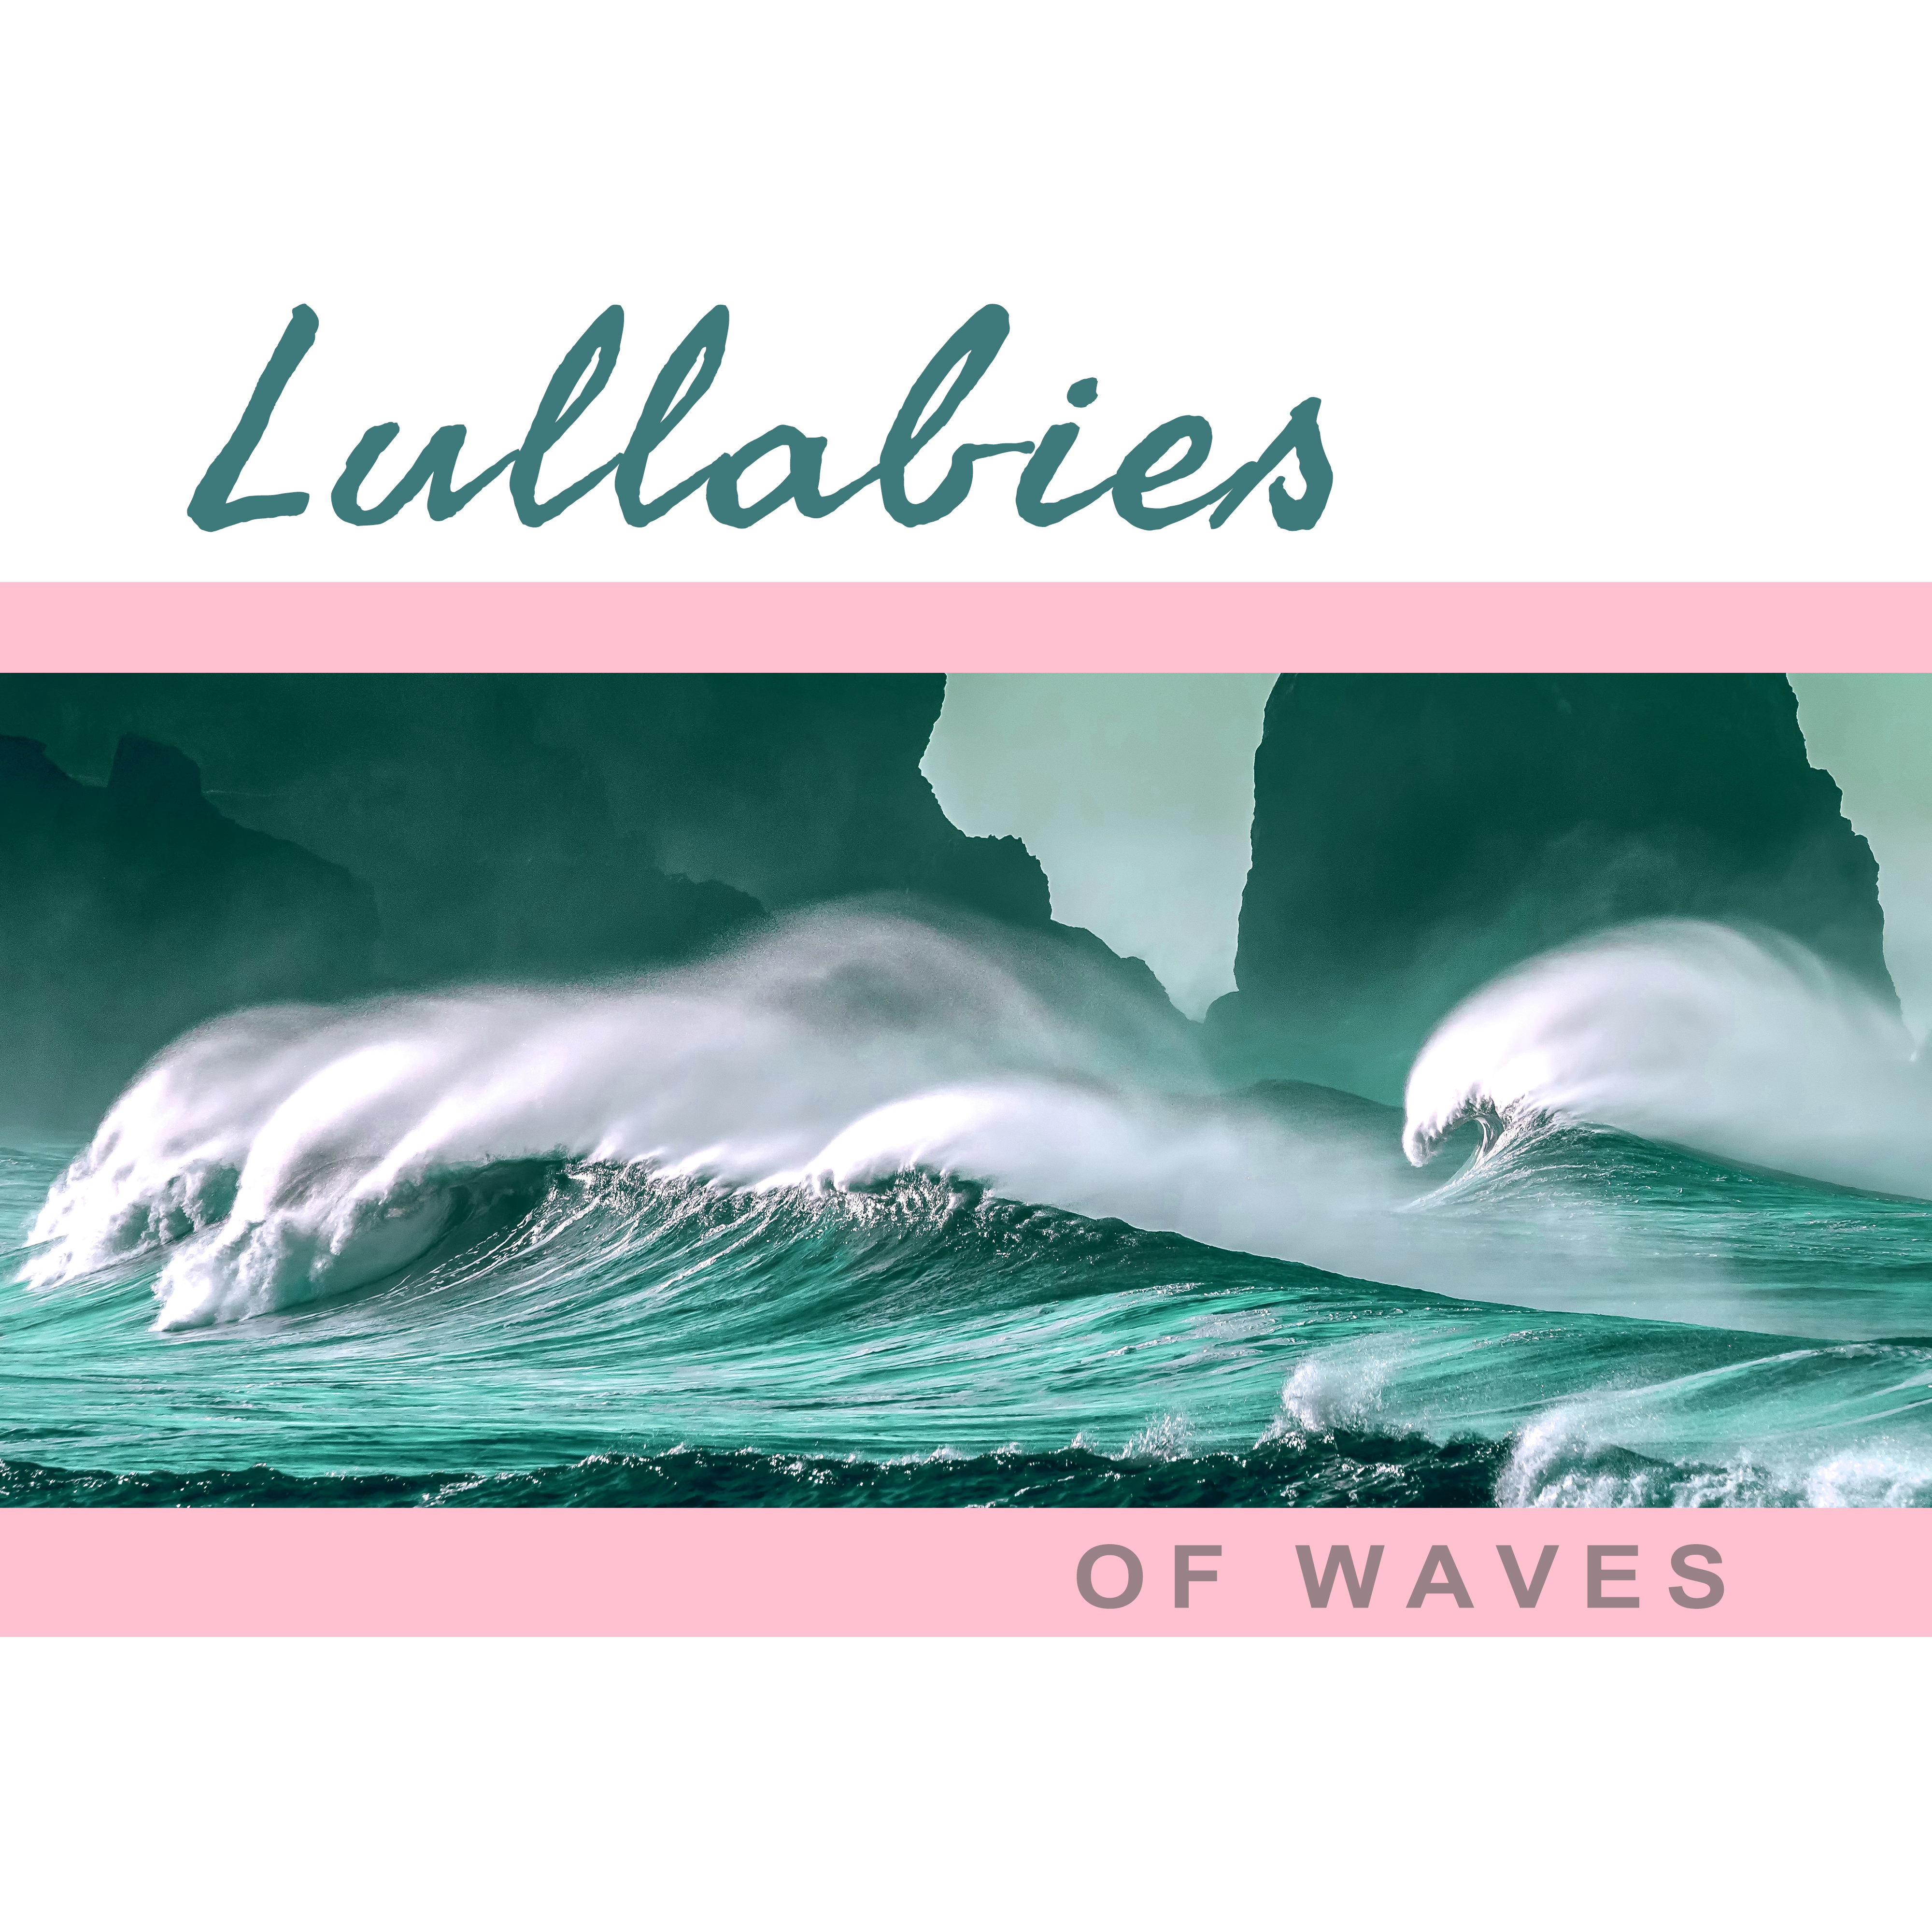 Lullabies of Waves – Calming Sounds of Waves, Nature Music, New Age, Relaxing Music Therapy, Ocean Waves